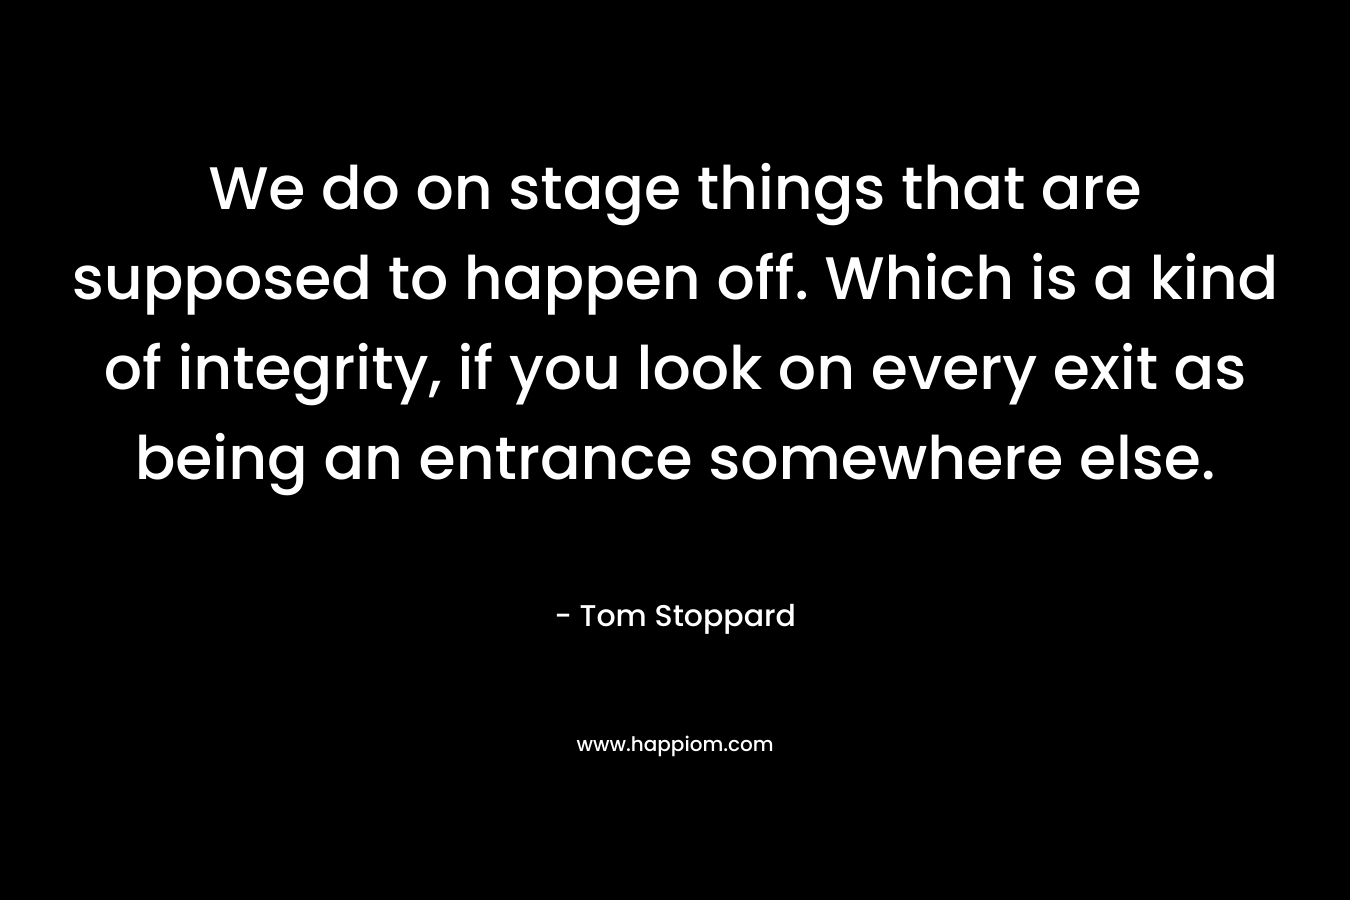 We do on stage things that are supposed to happen off. Which is a kind of integrity, if you look on every exit as being an entrance somewhere else. – Tom Stoppard